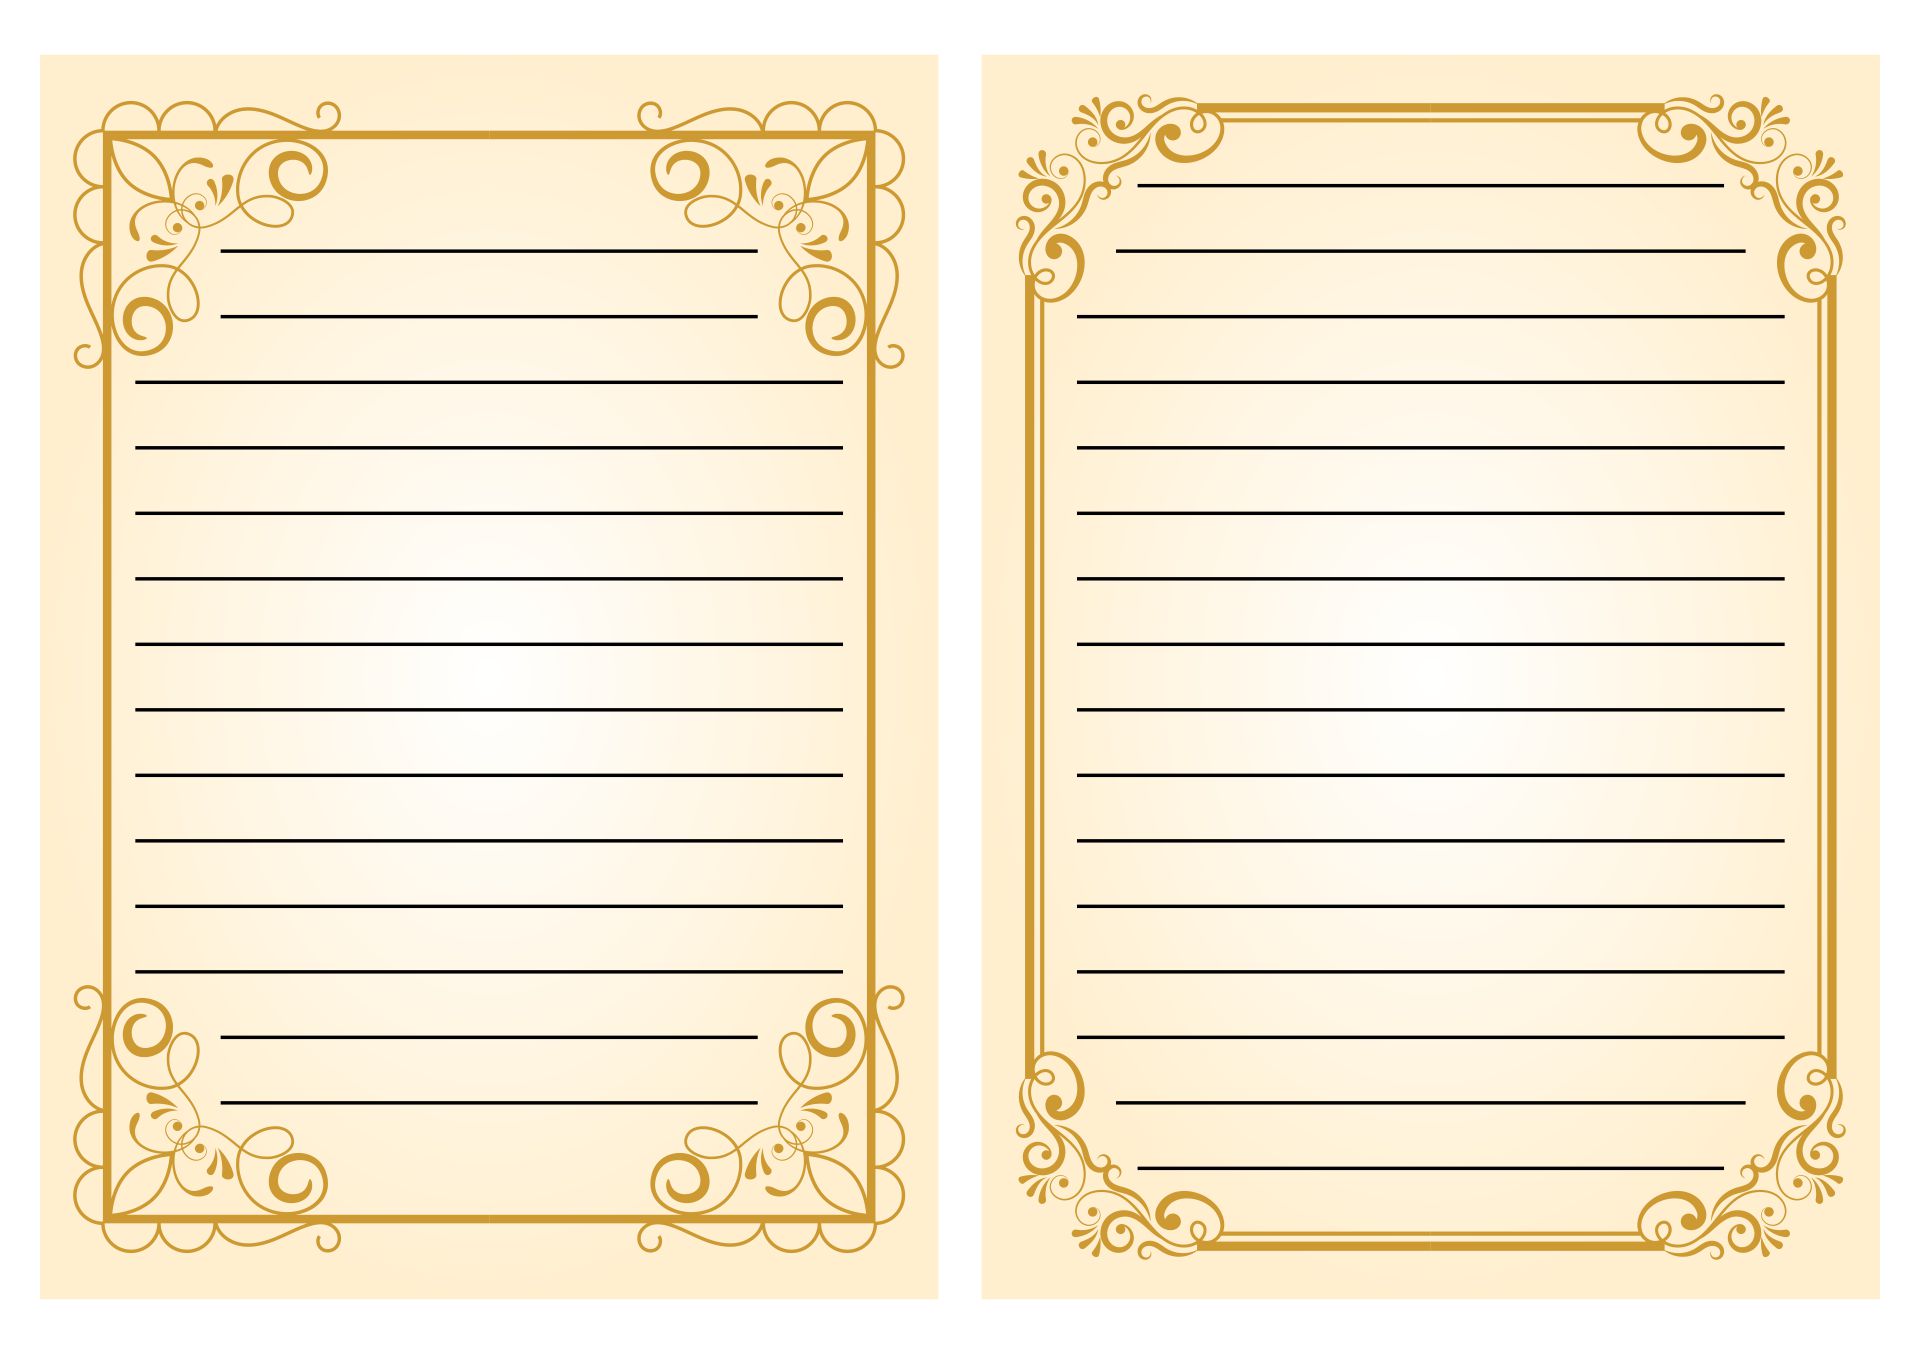 Printable Swirling Border Lined Paper